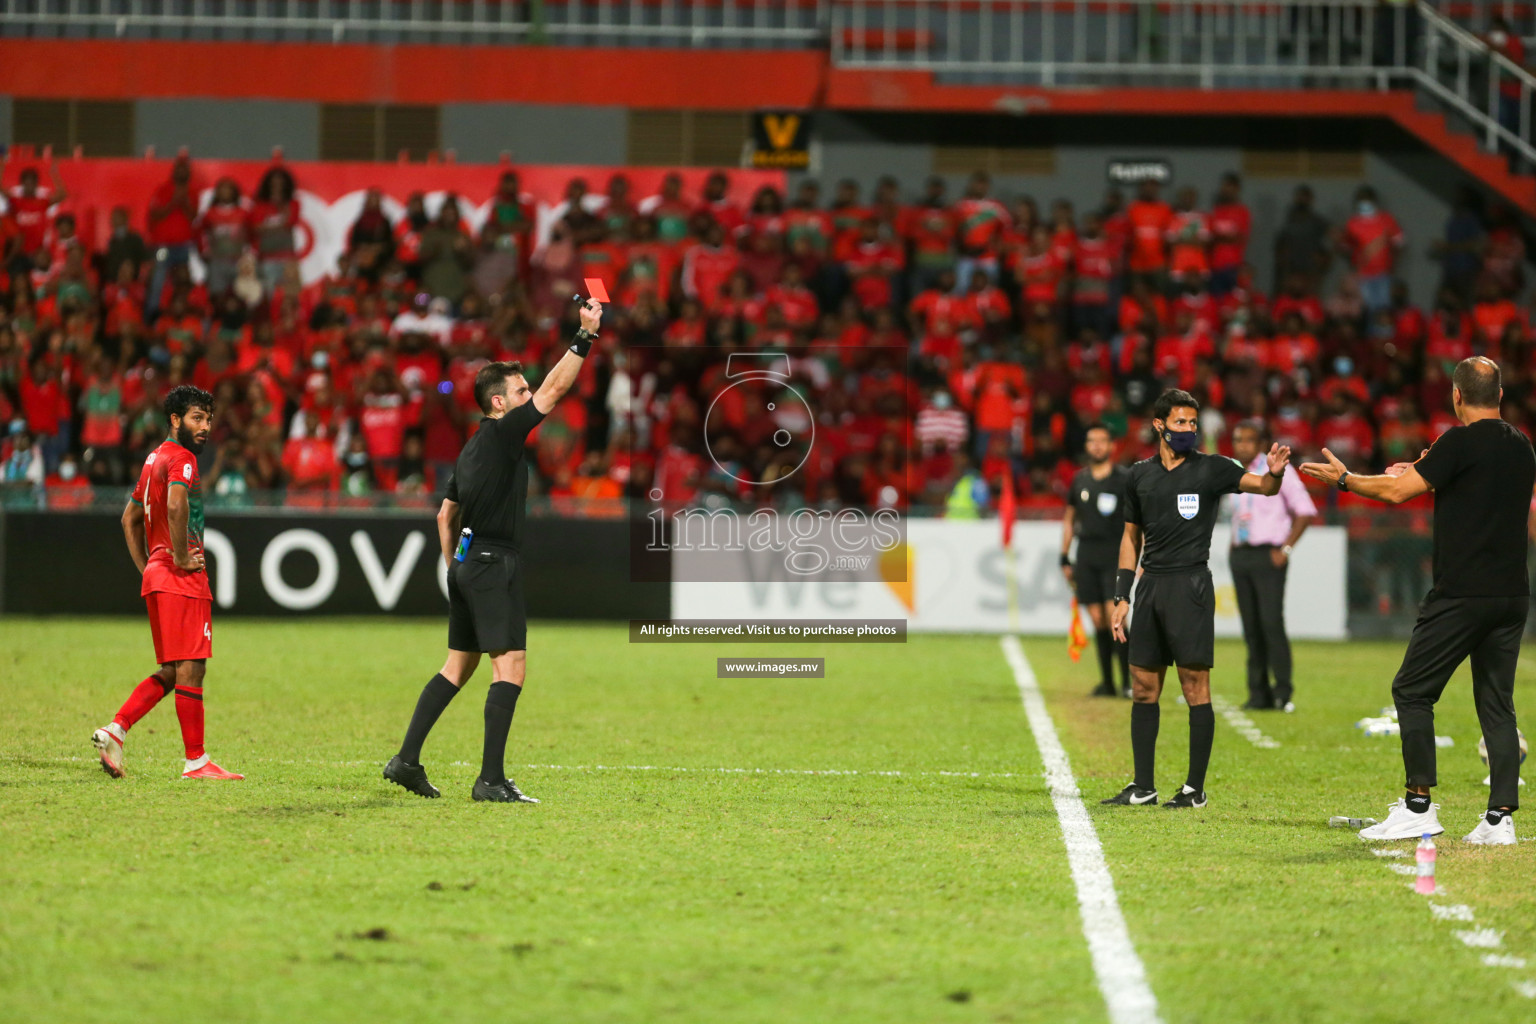 Maldives vs India in SAFF Championship 2021 held on 13th October 2021 in Galolhu National Stadium, Male', Maldives